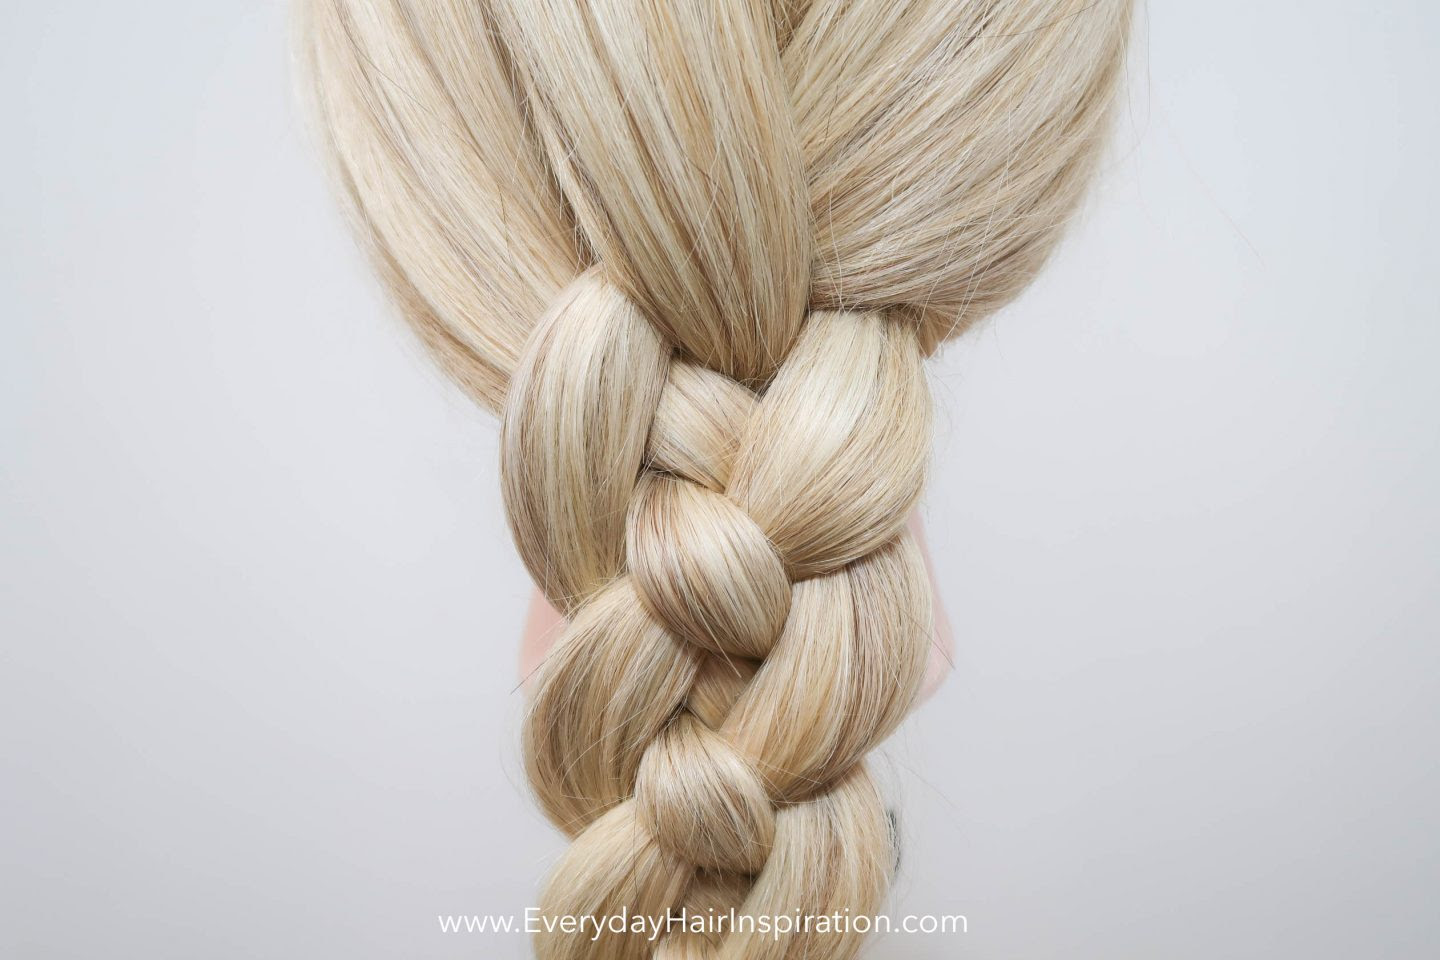 The efficient braid 4 strands come with uniform diameters and do not contain any musty, unpleasant odors. How To 4 Strand Braid Everyday Hair Inspiration Braided Styles